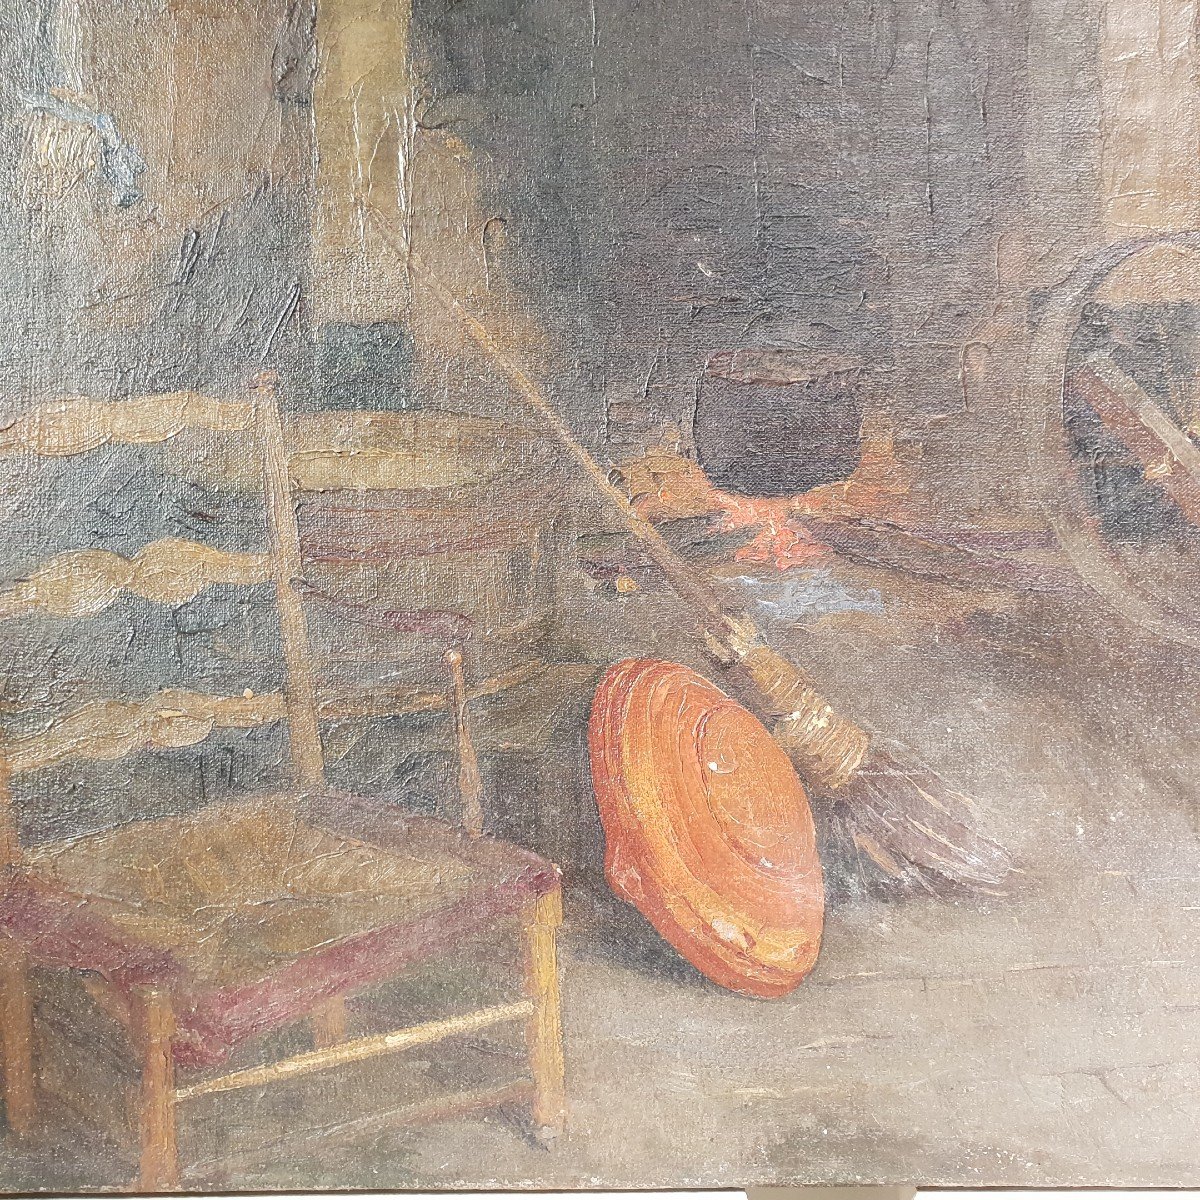 Spinner Painting, Country House Interior, 20th Century Peasantry-photo-3